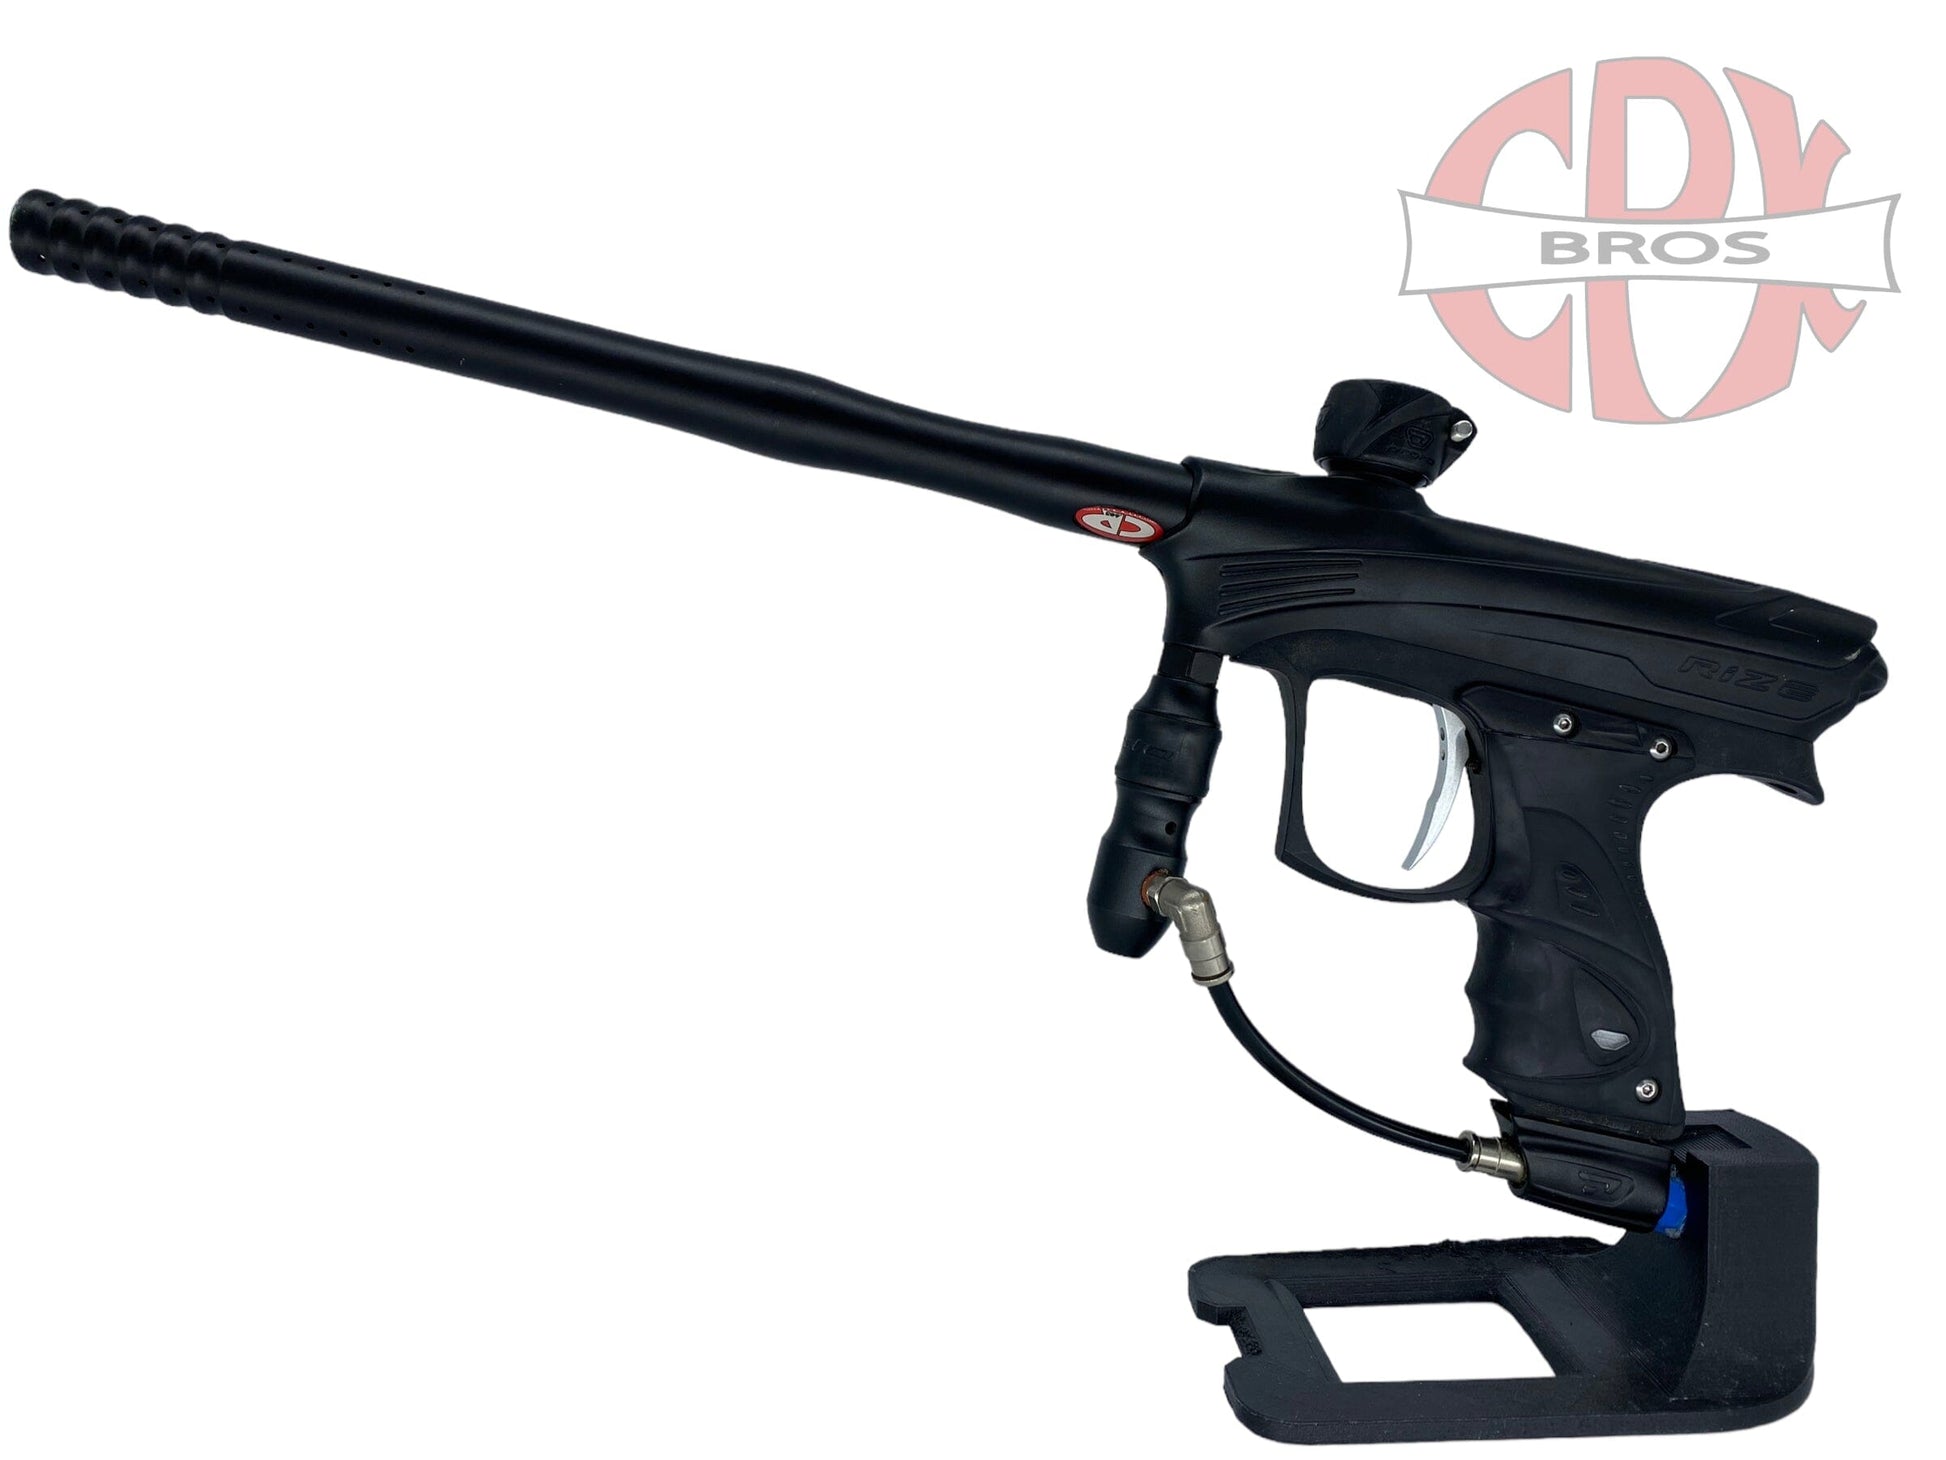 Used Dye Rize Paintball Gun Paintball Gun from CPXBrosPaintball Buy/Sell/Trade Paintball Markers, Paintball Hoppers, Paintball Masks, and Hormesis Headbands